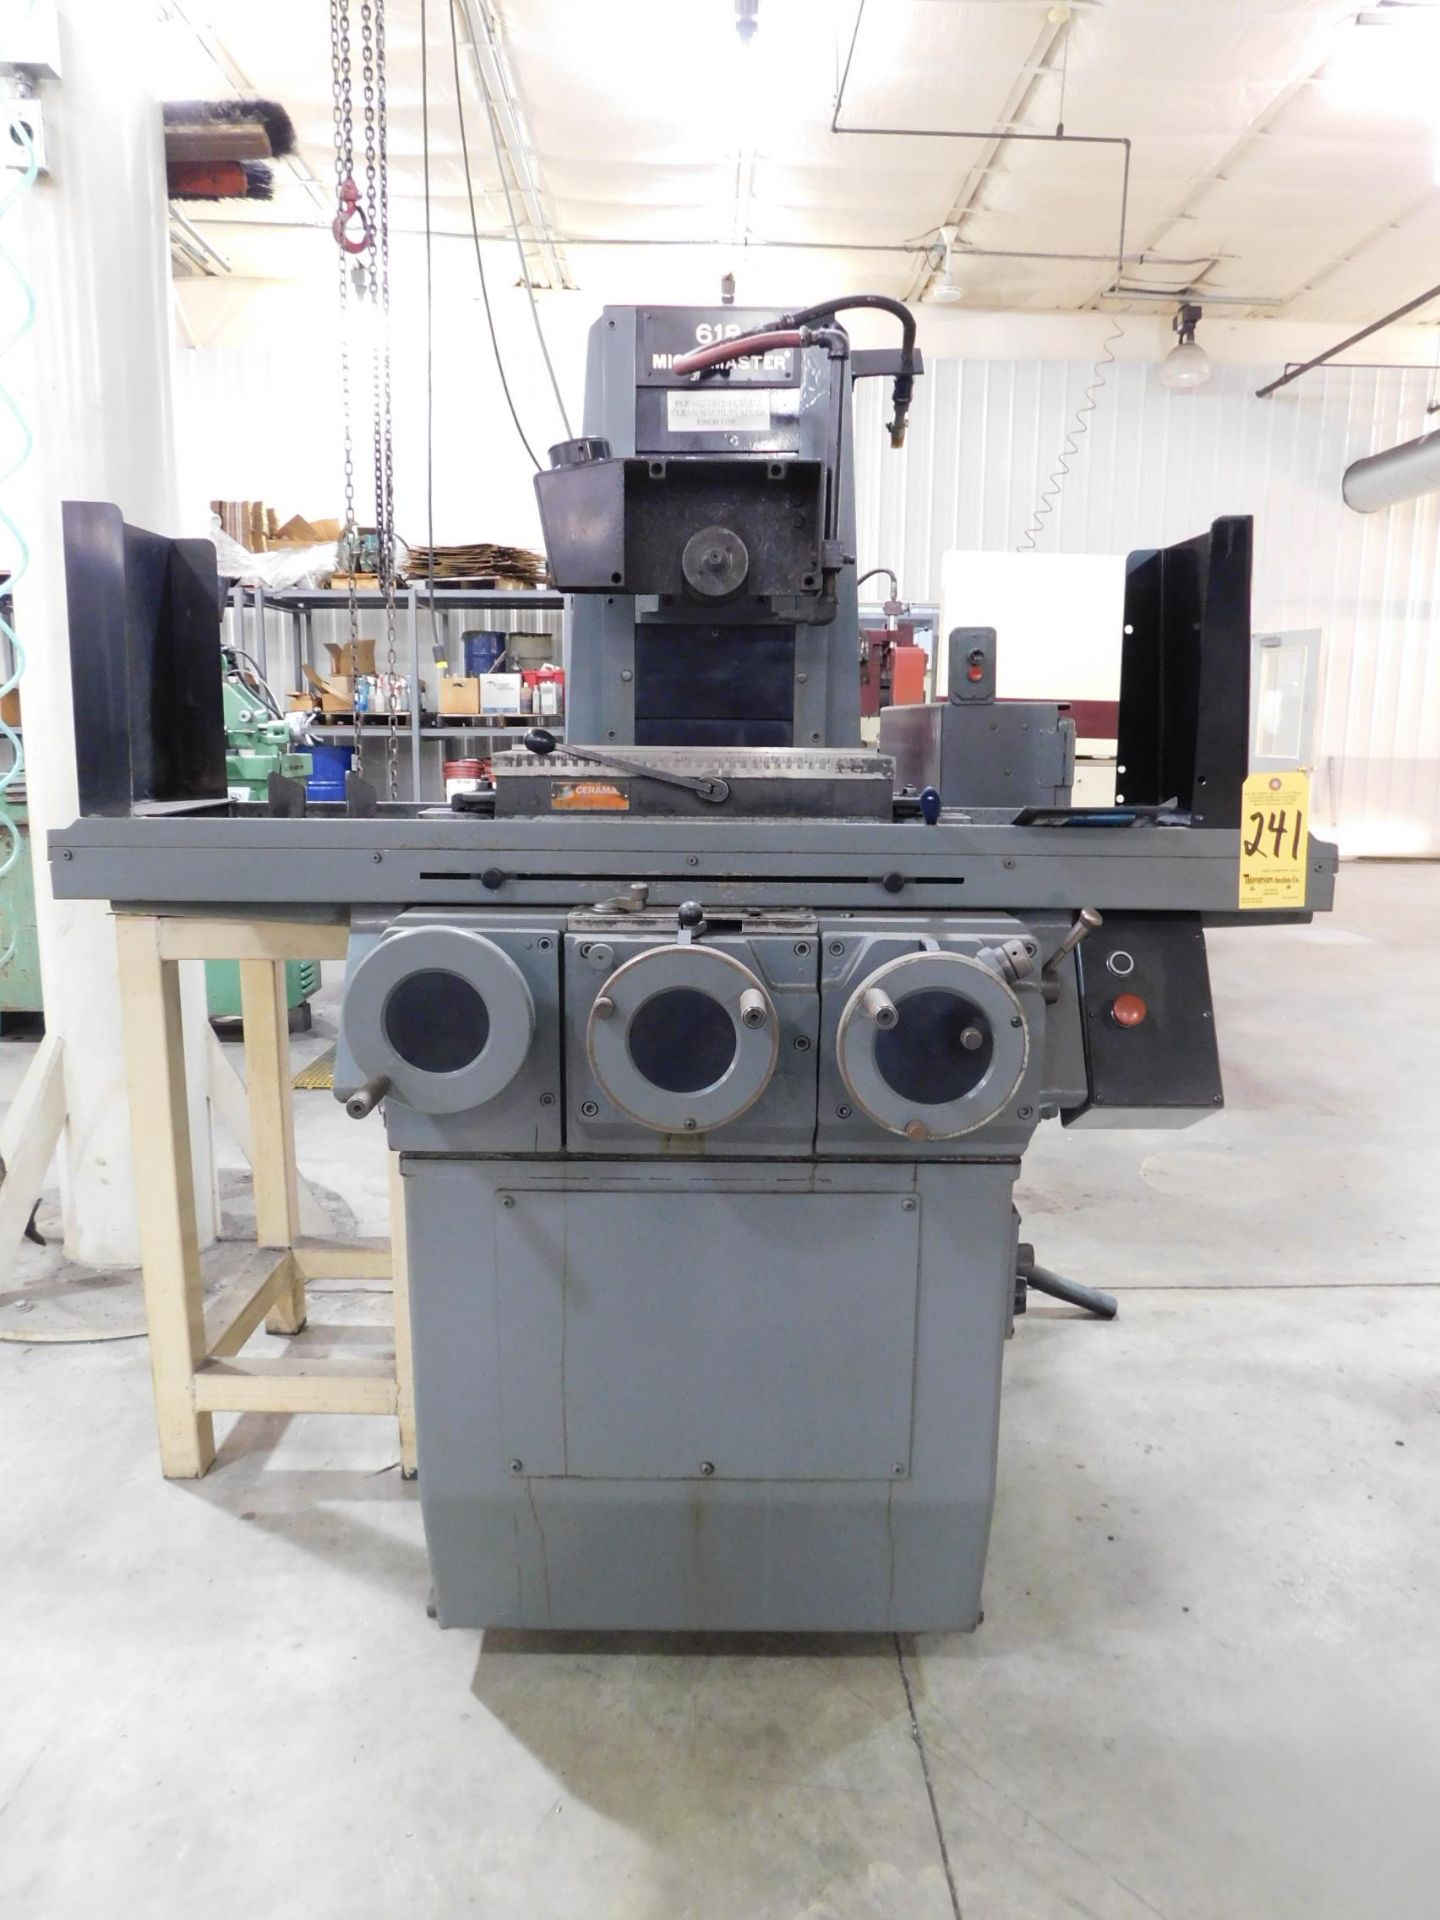 Brown & Sharpe Model 618 Micromaster 2-Axis Hydraulic Surface Grinder sn 523-6182-6038, w/Walker